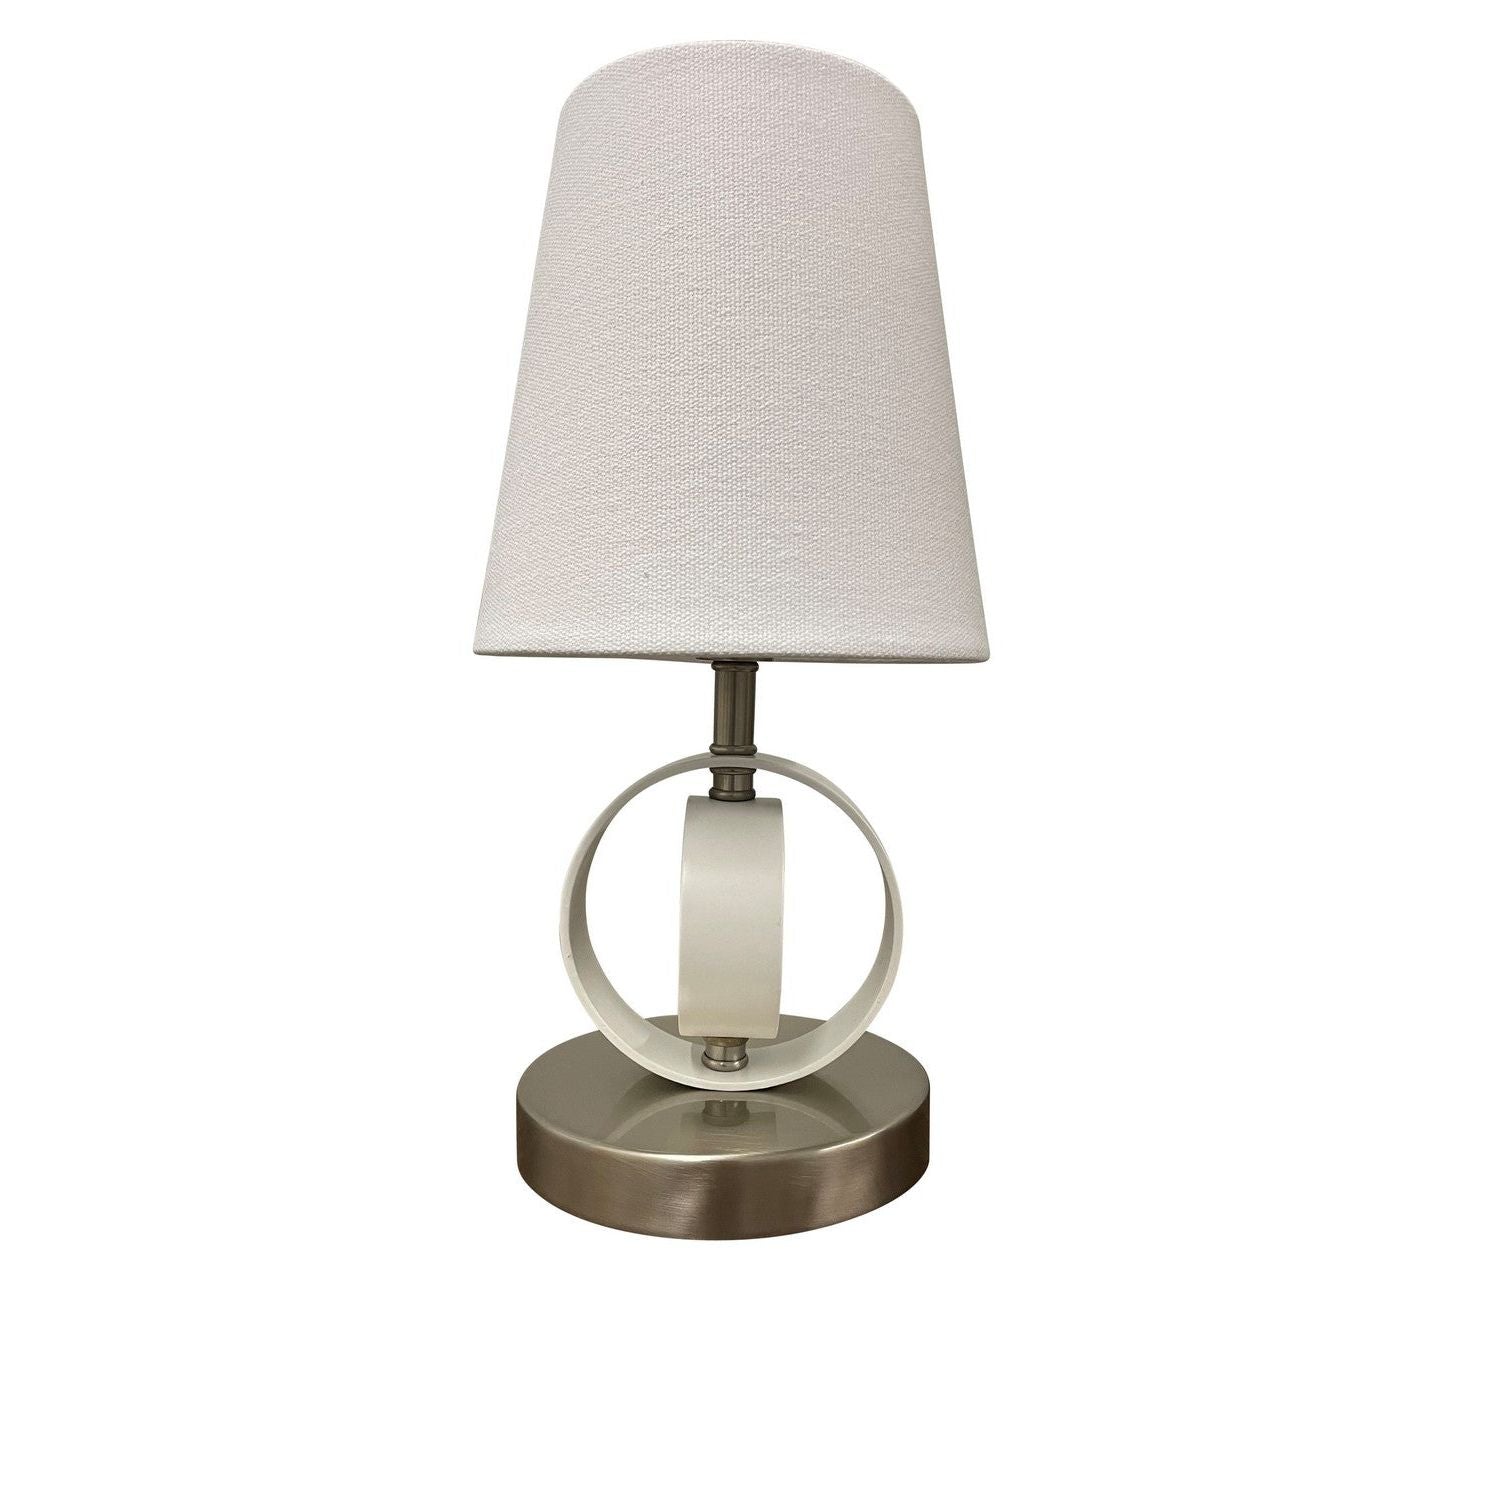 House of Troy - B209-SN/WT - One Light Accent Lamp - Bryson - Satin Nickel/White